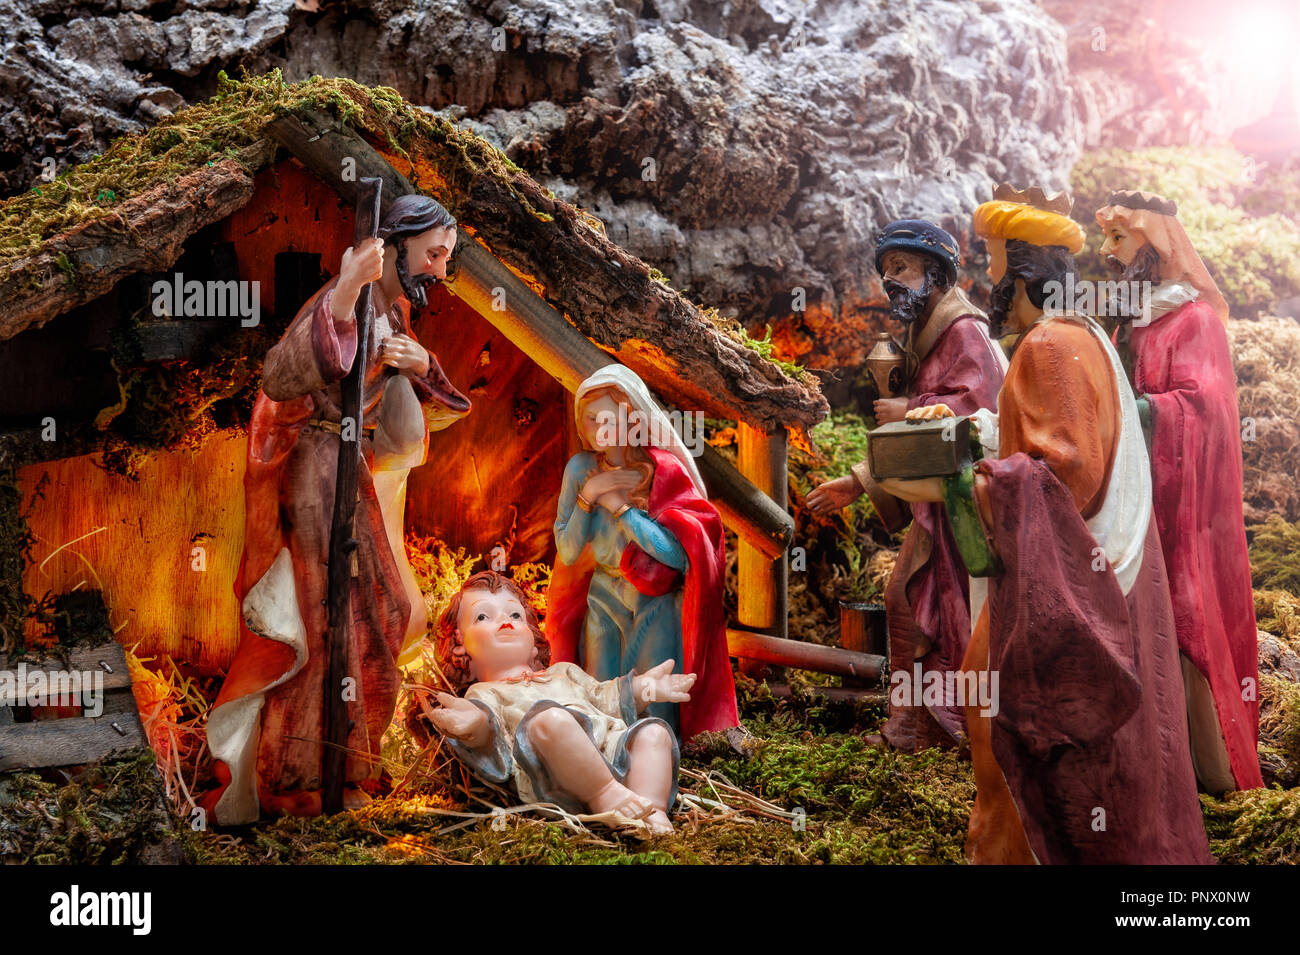 Close-up of the Christmas Nativity scene. Hut with baby Jesus in the ...